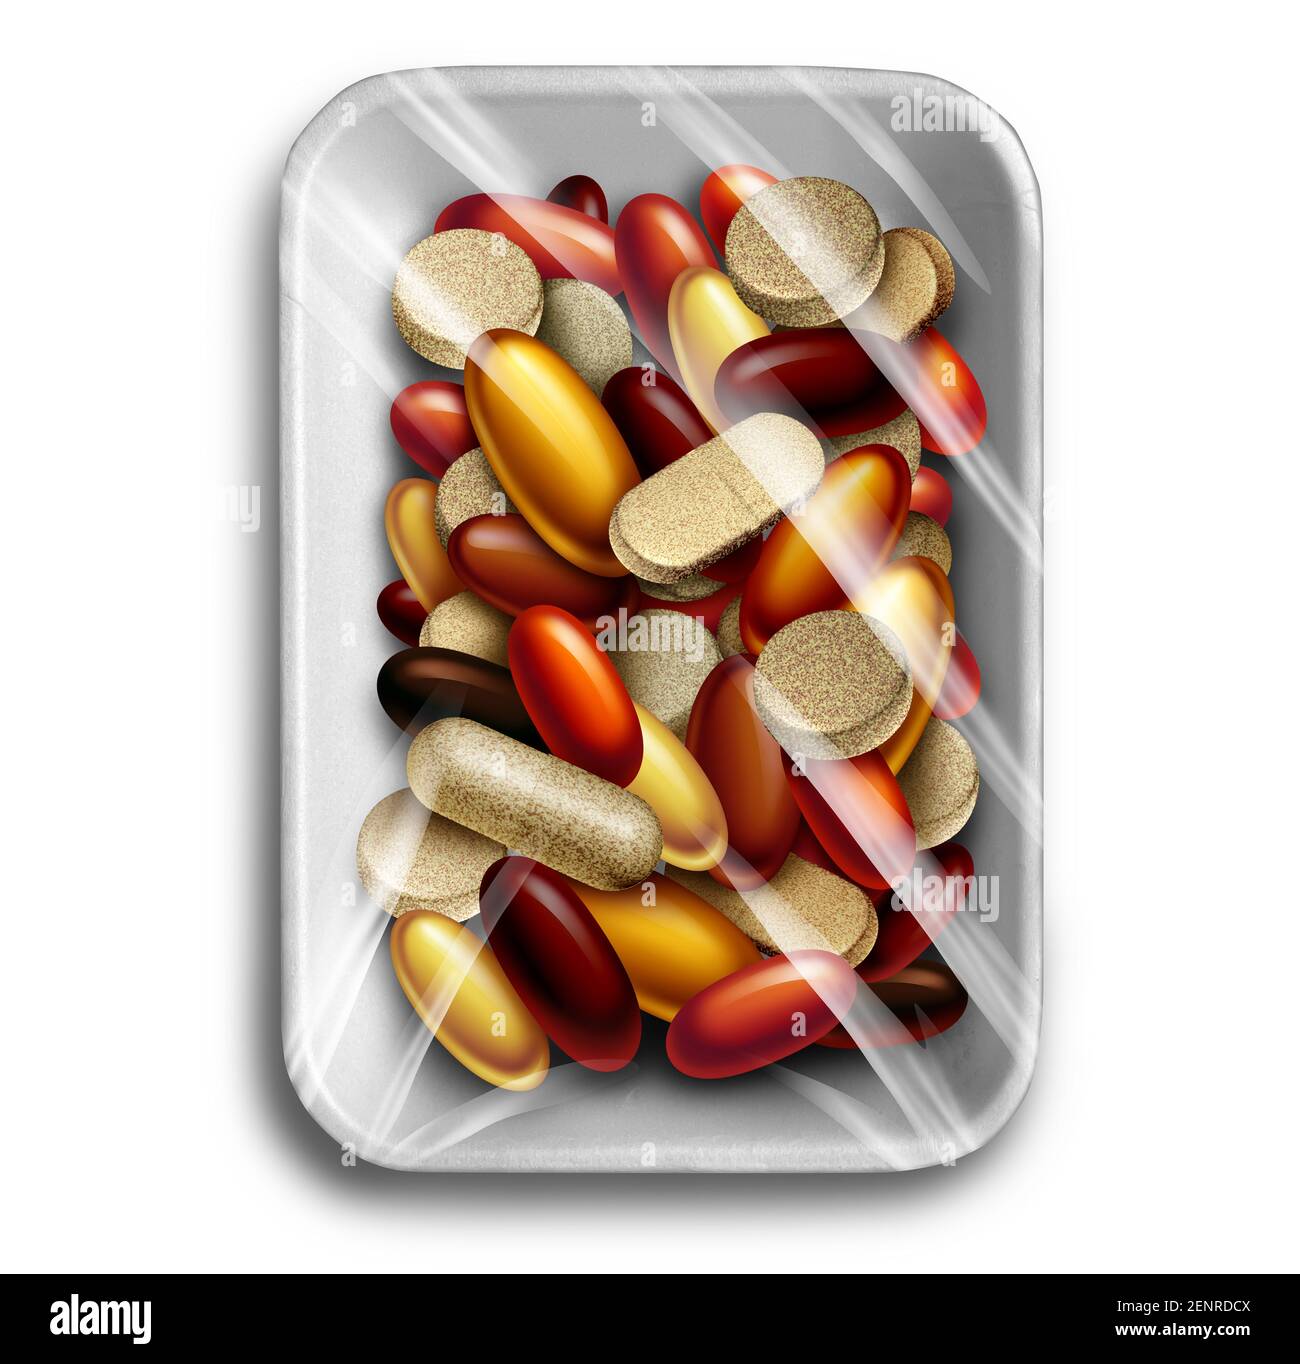 Health supplements and vitamin food supplement as a wrapped polystyrene tray with a group of capsule and pills as a natural nutrient medicine. Stock Photo